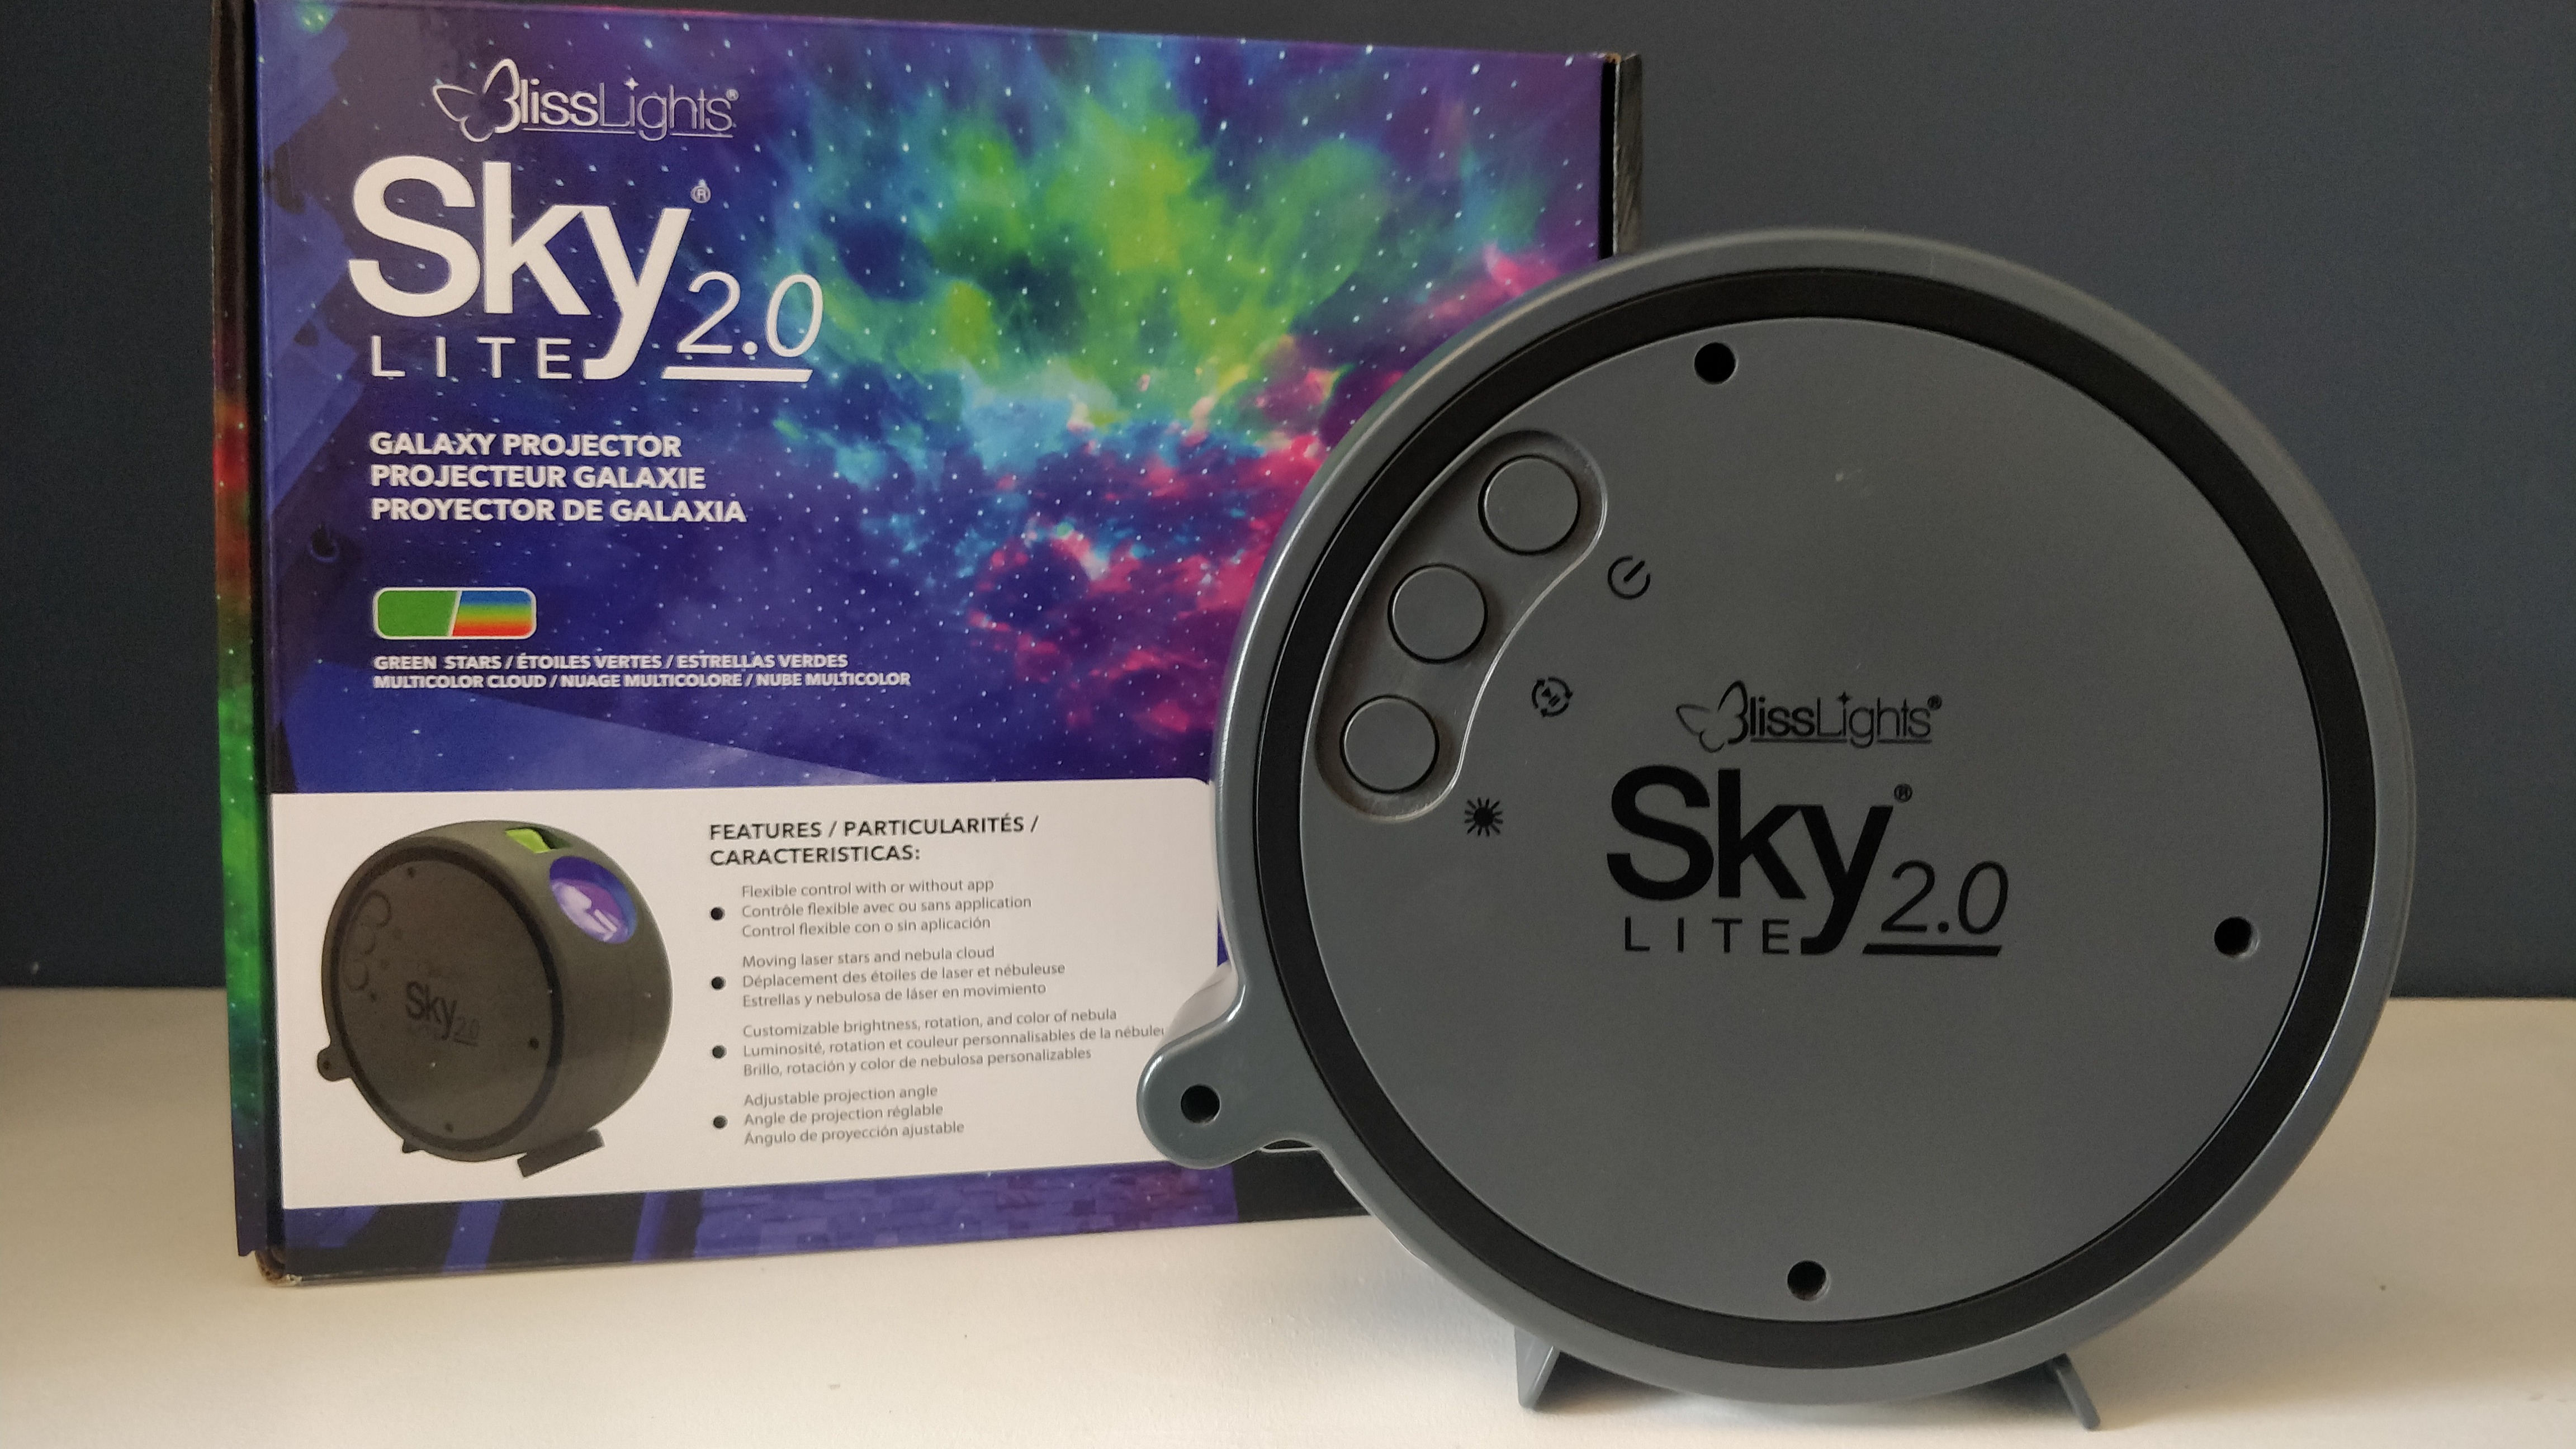 Sky Lite 2.0 product and box set on a white table